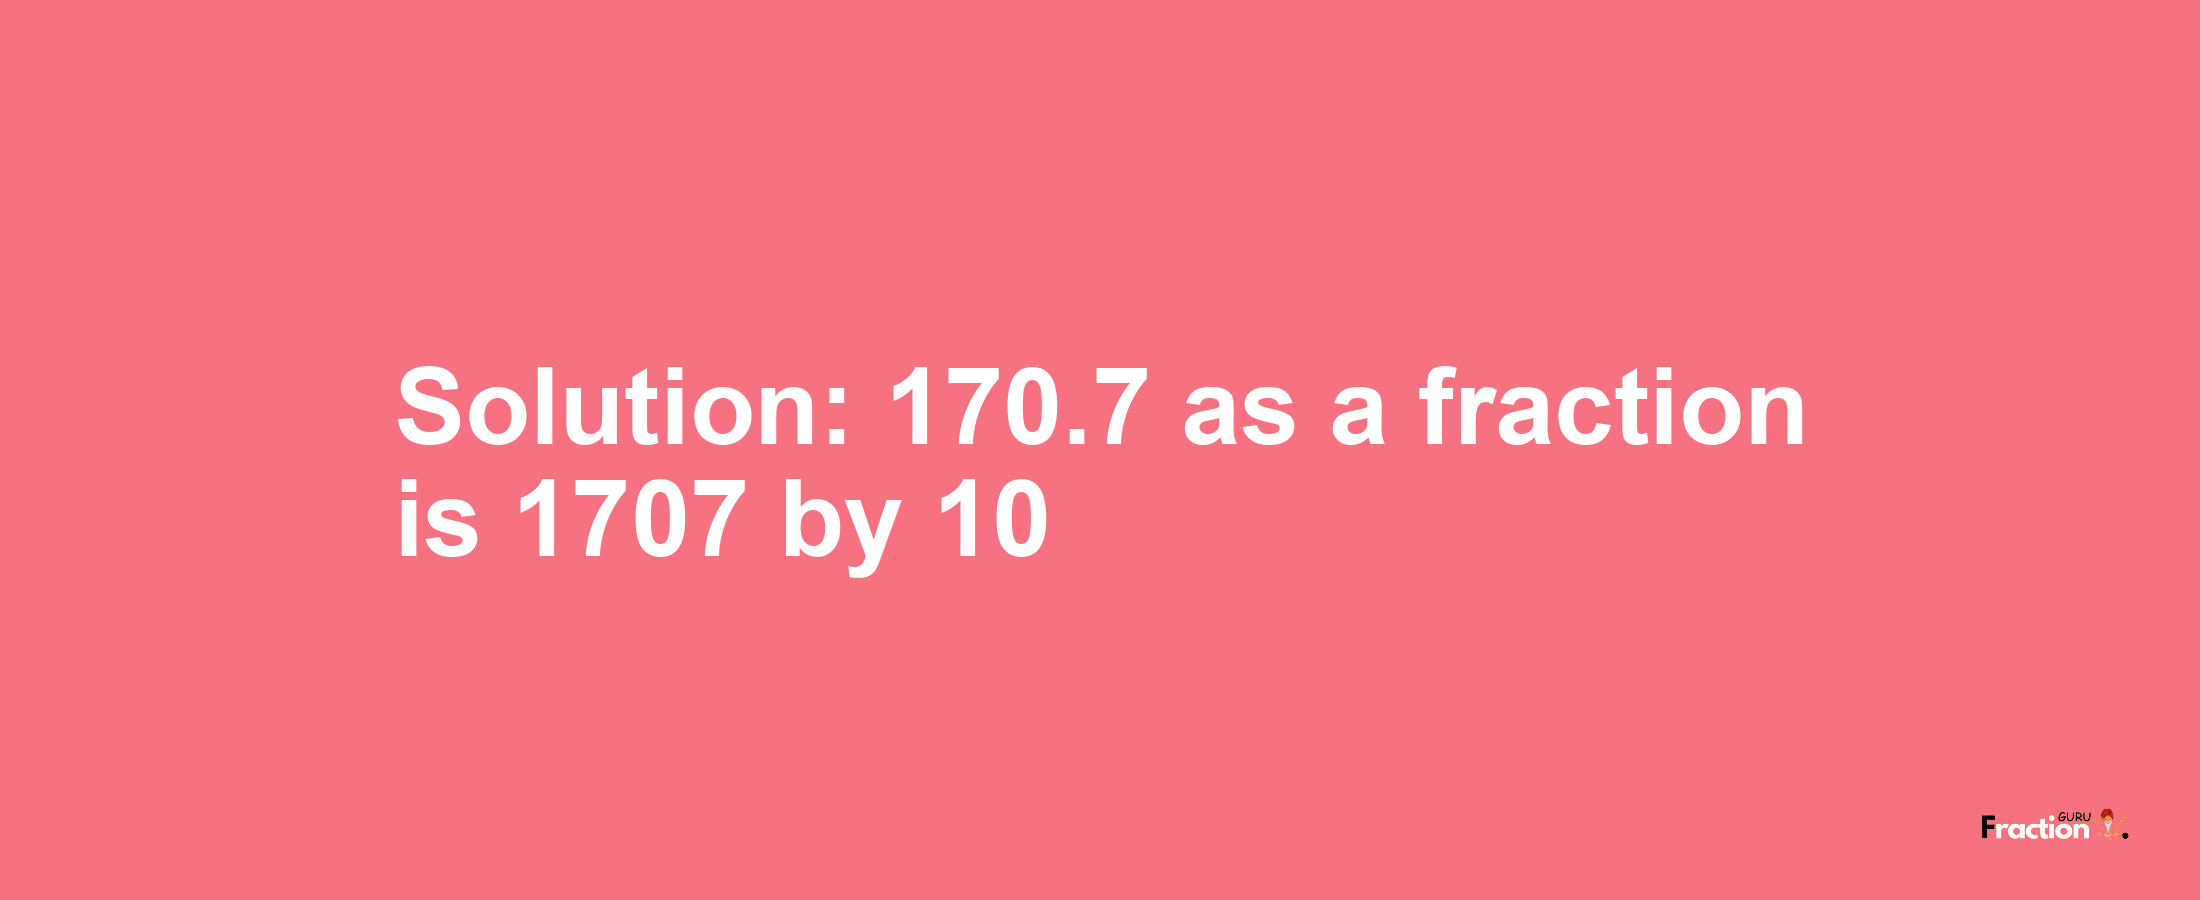 Solution:170.7 as a fraction is 1707/10